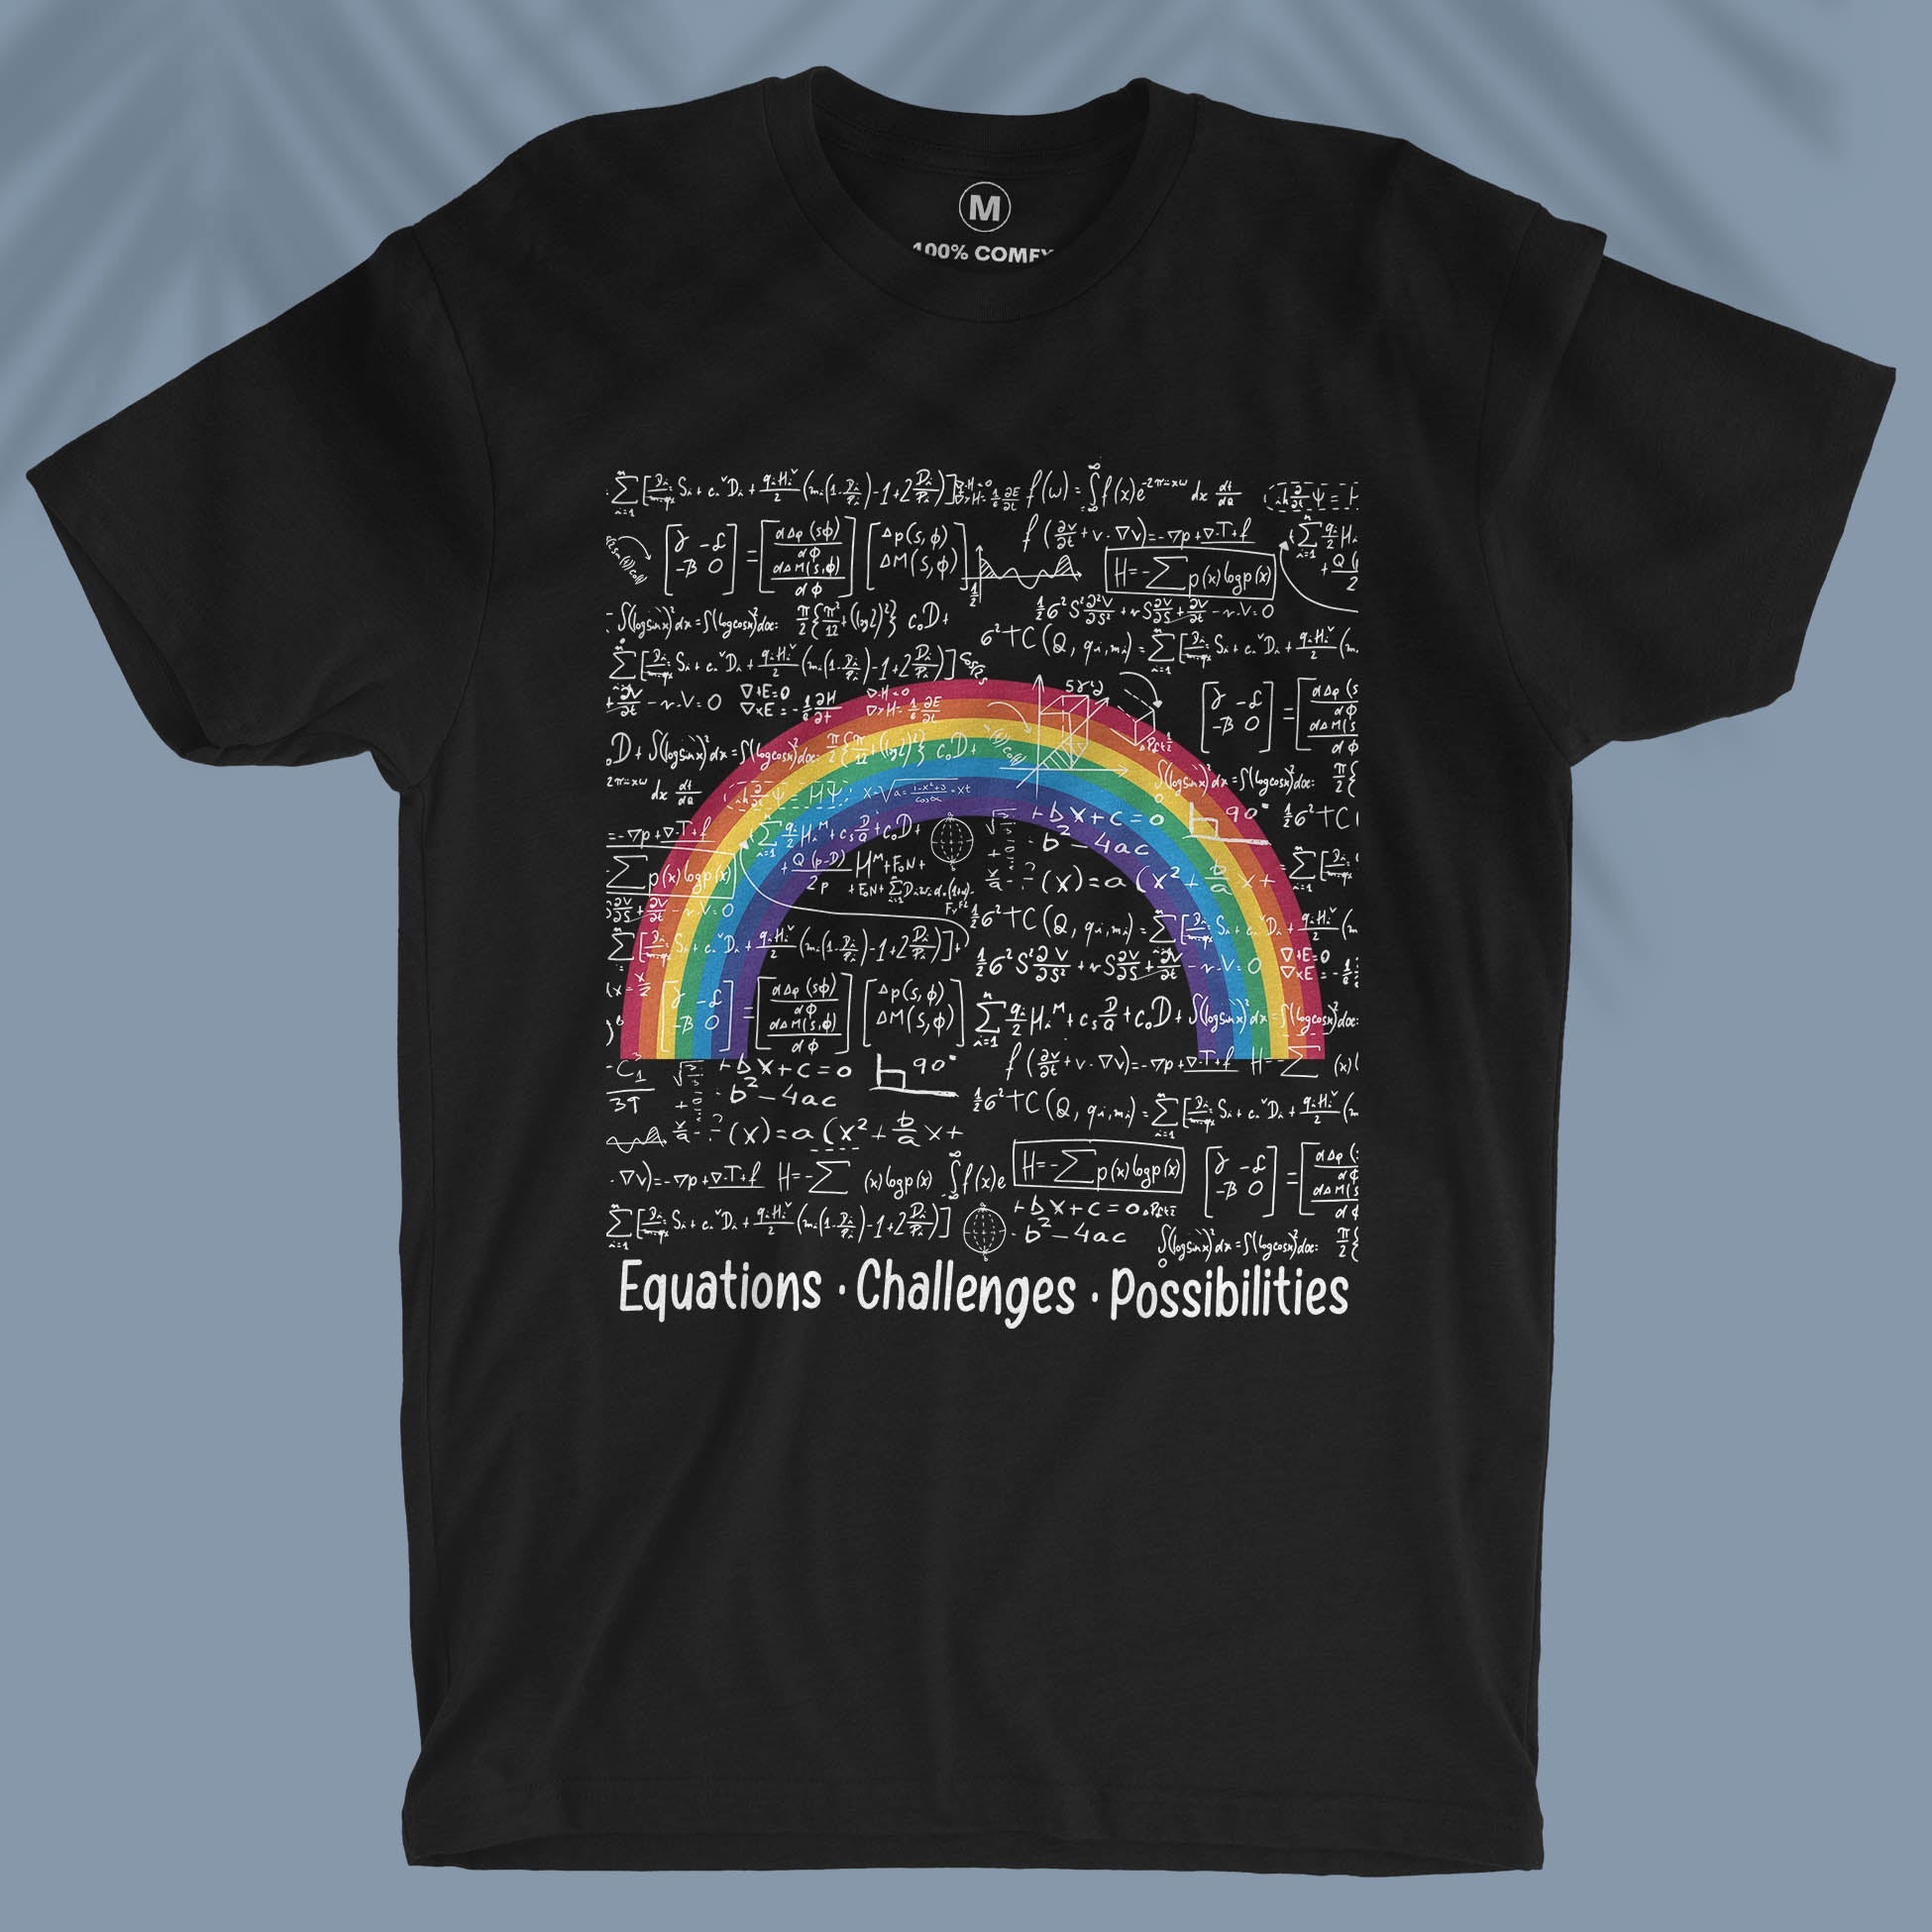 Equations, Challenges, Possibilities  - Unisex T-shirt For Mathematics Teachers And Learners